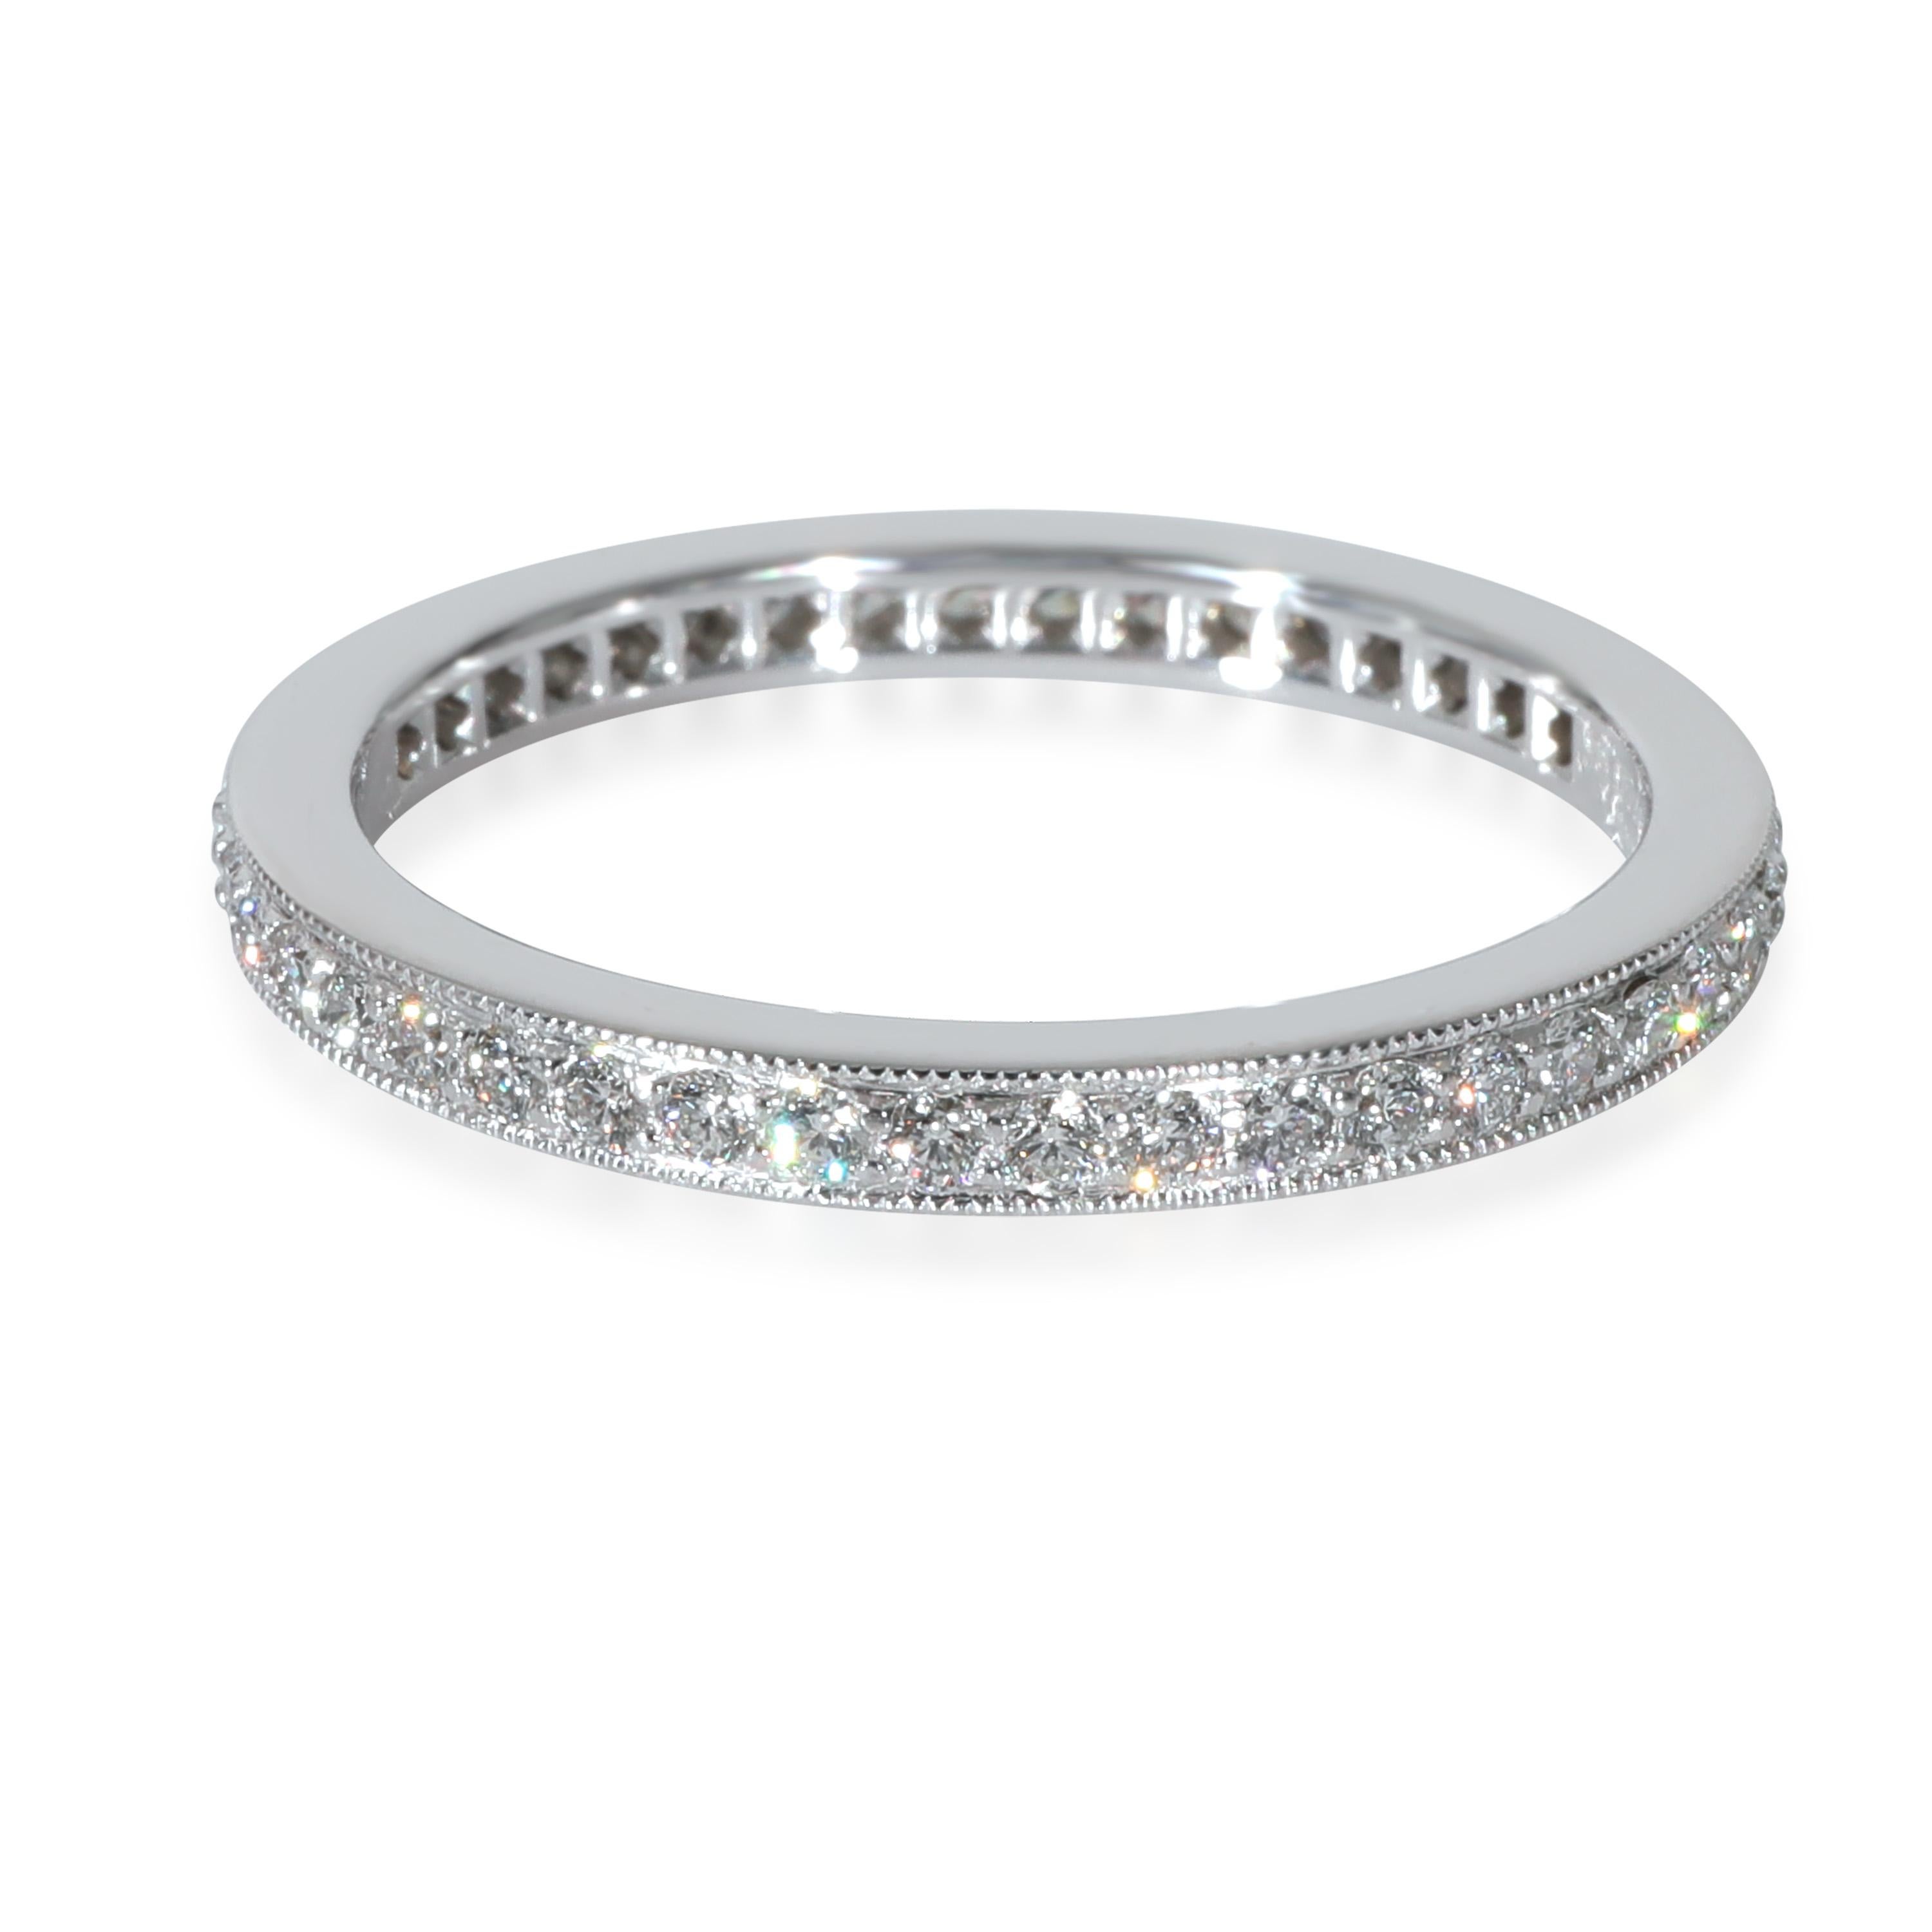 Tiffany & Co. Tiffany Together Diamond Eternity Band in  Platinum 0.36 CTW

PRIMARY DETAILS
SKU: 130417
Listing Title: Tiffany & Co. Tiffany Together Diamond Eternity Band in  Platinum 0.36 CTW
Condition Description: Tiffany reinvents a classic with